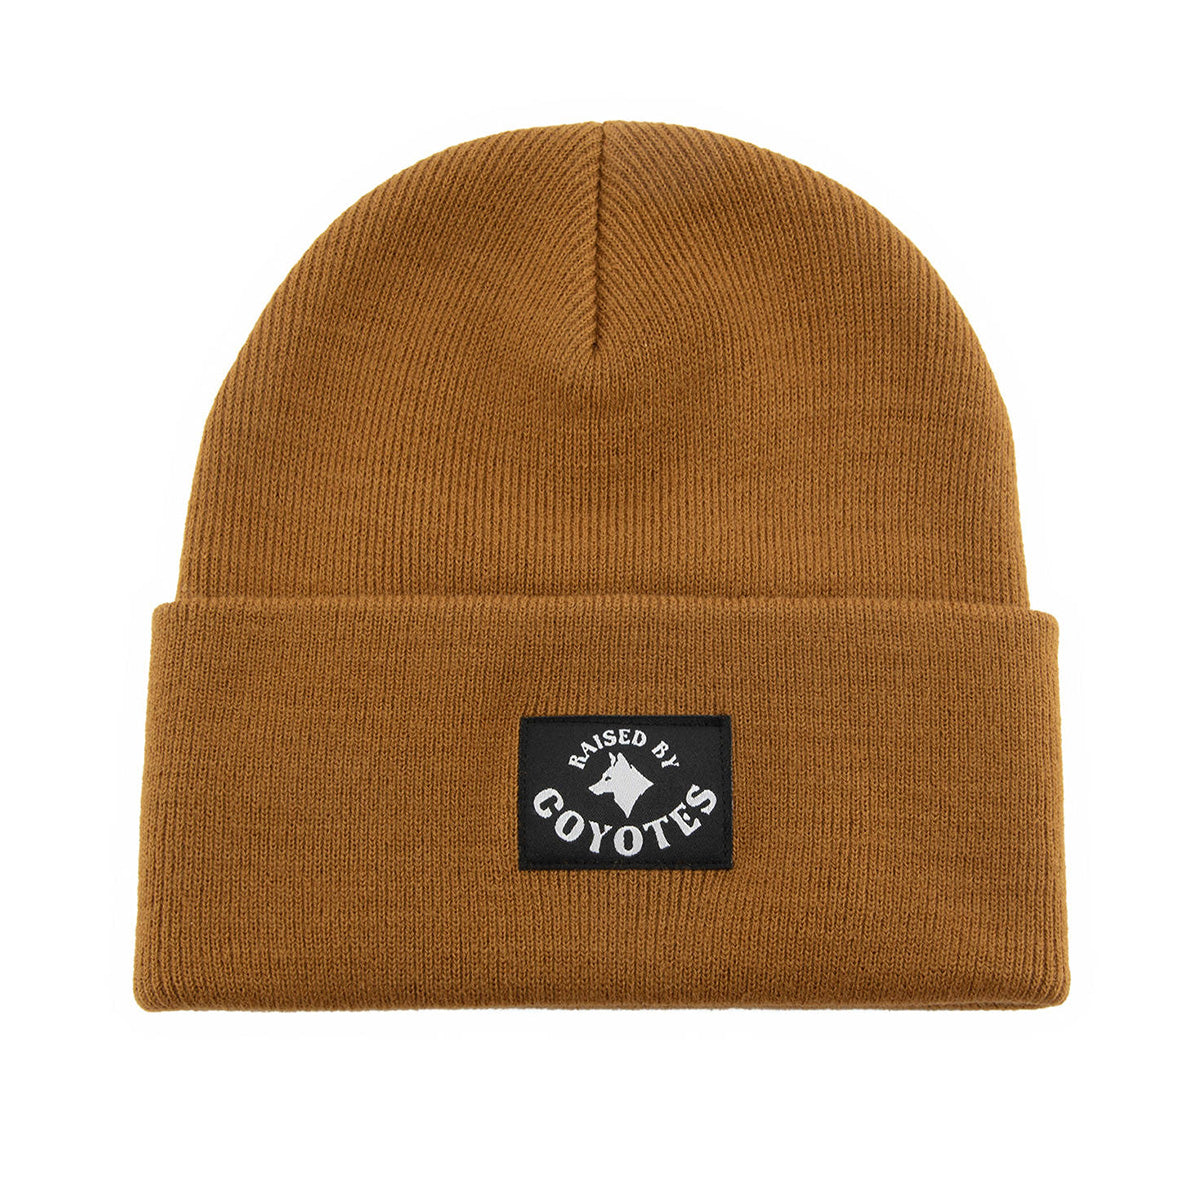 Coyotes Knit Beanie Brown